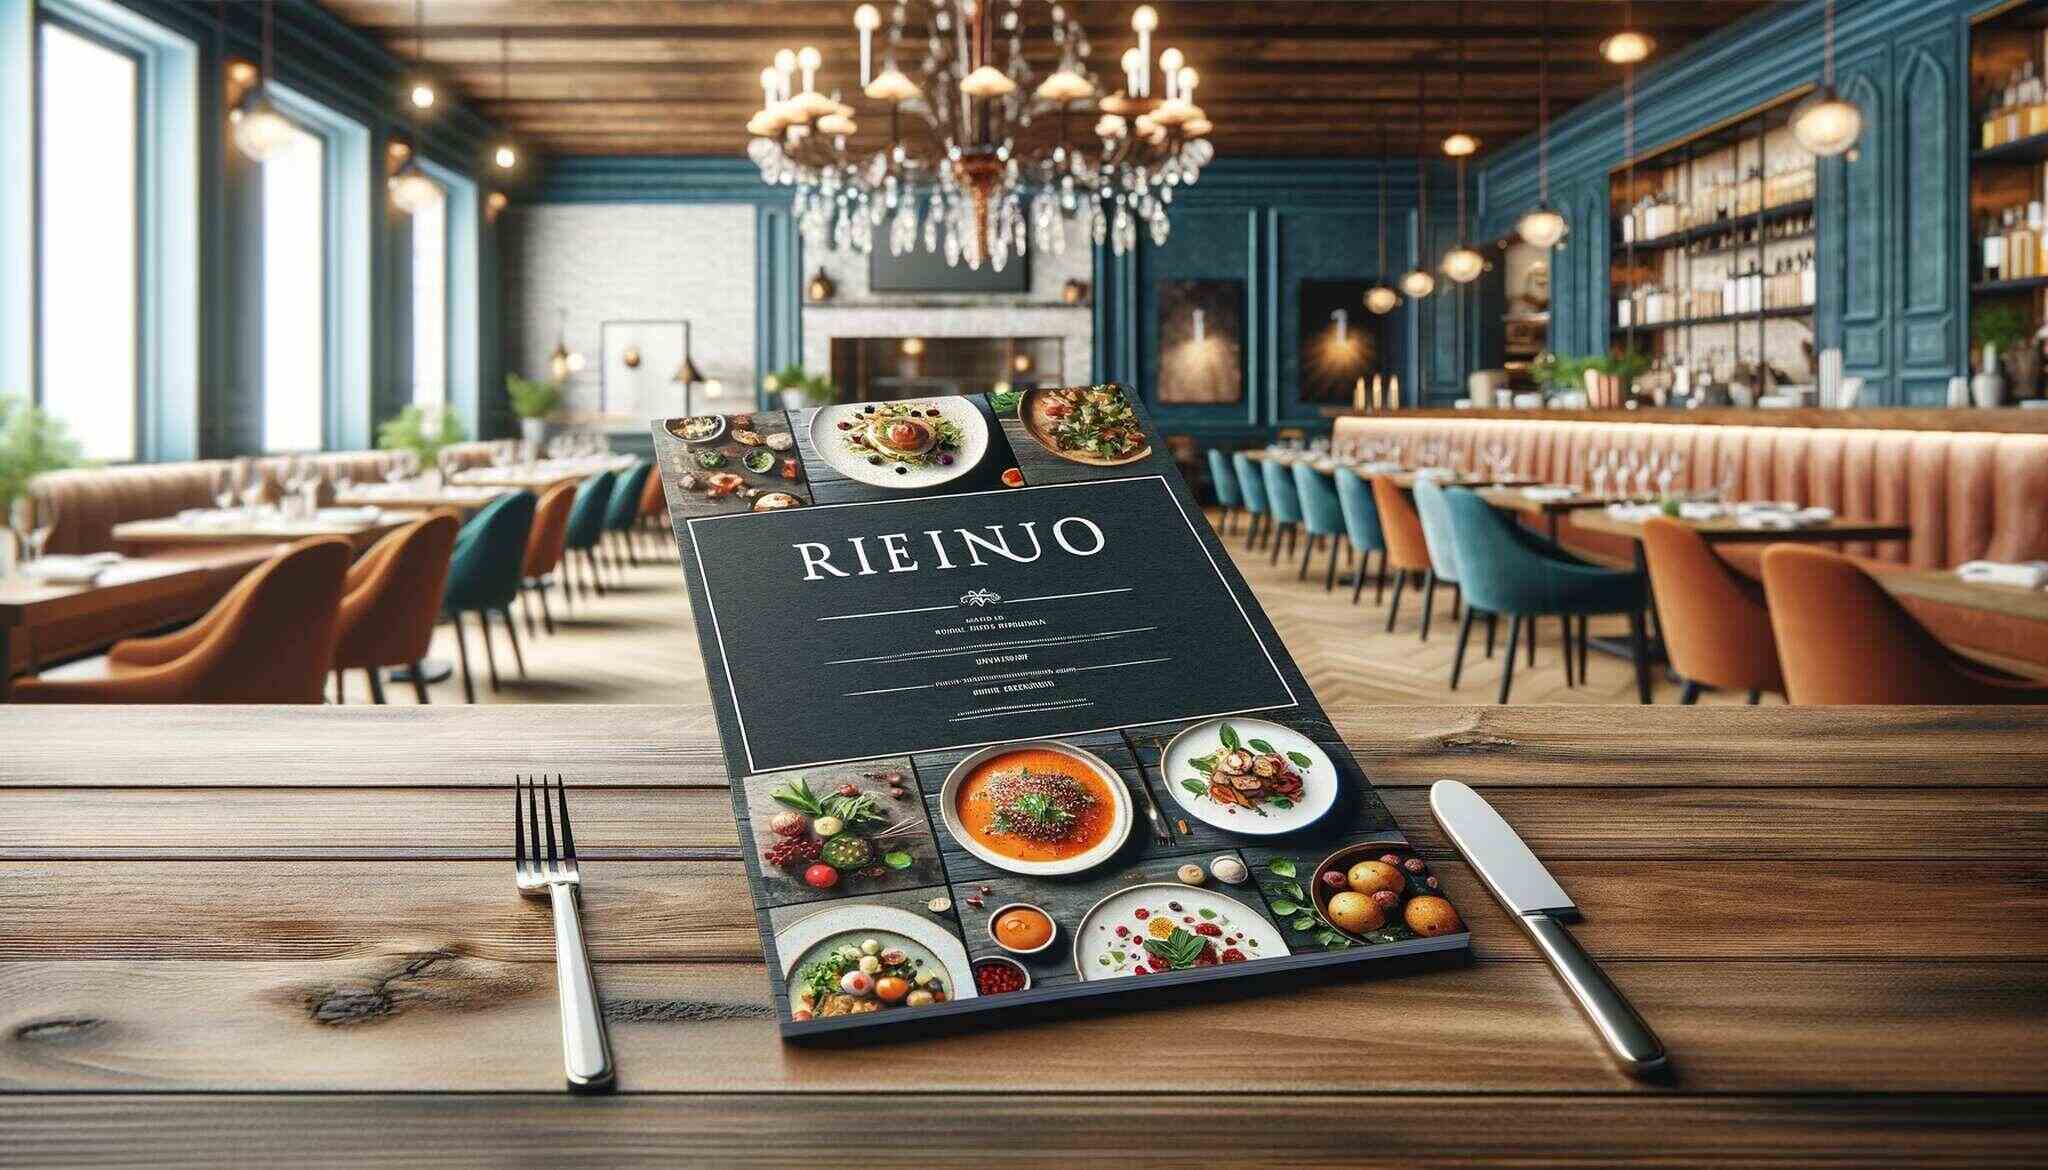 restaurant menu with an elegant, modern layout and vivid images of gourmet dishes, placed on a wooden table